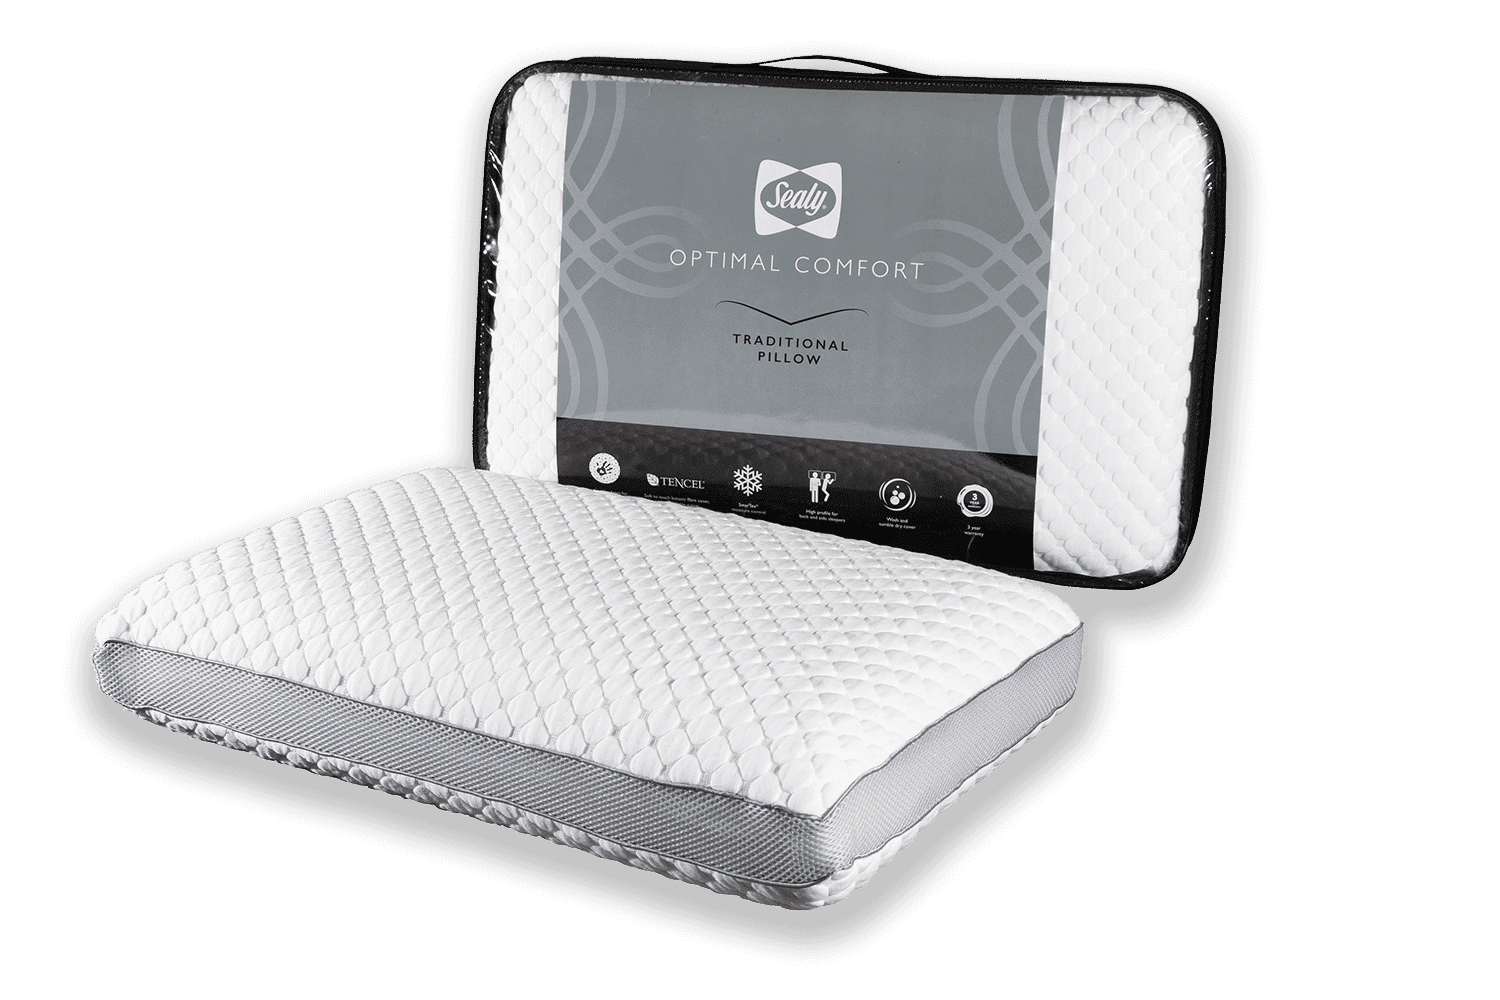 <span style="font-size:16px">Optimal comfort Pillows</span>